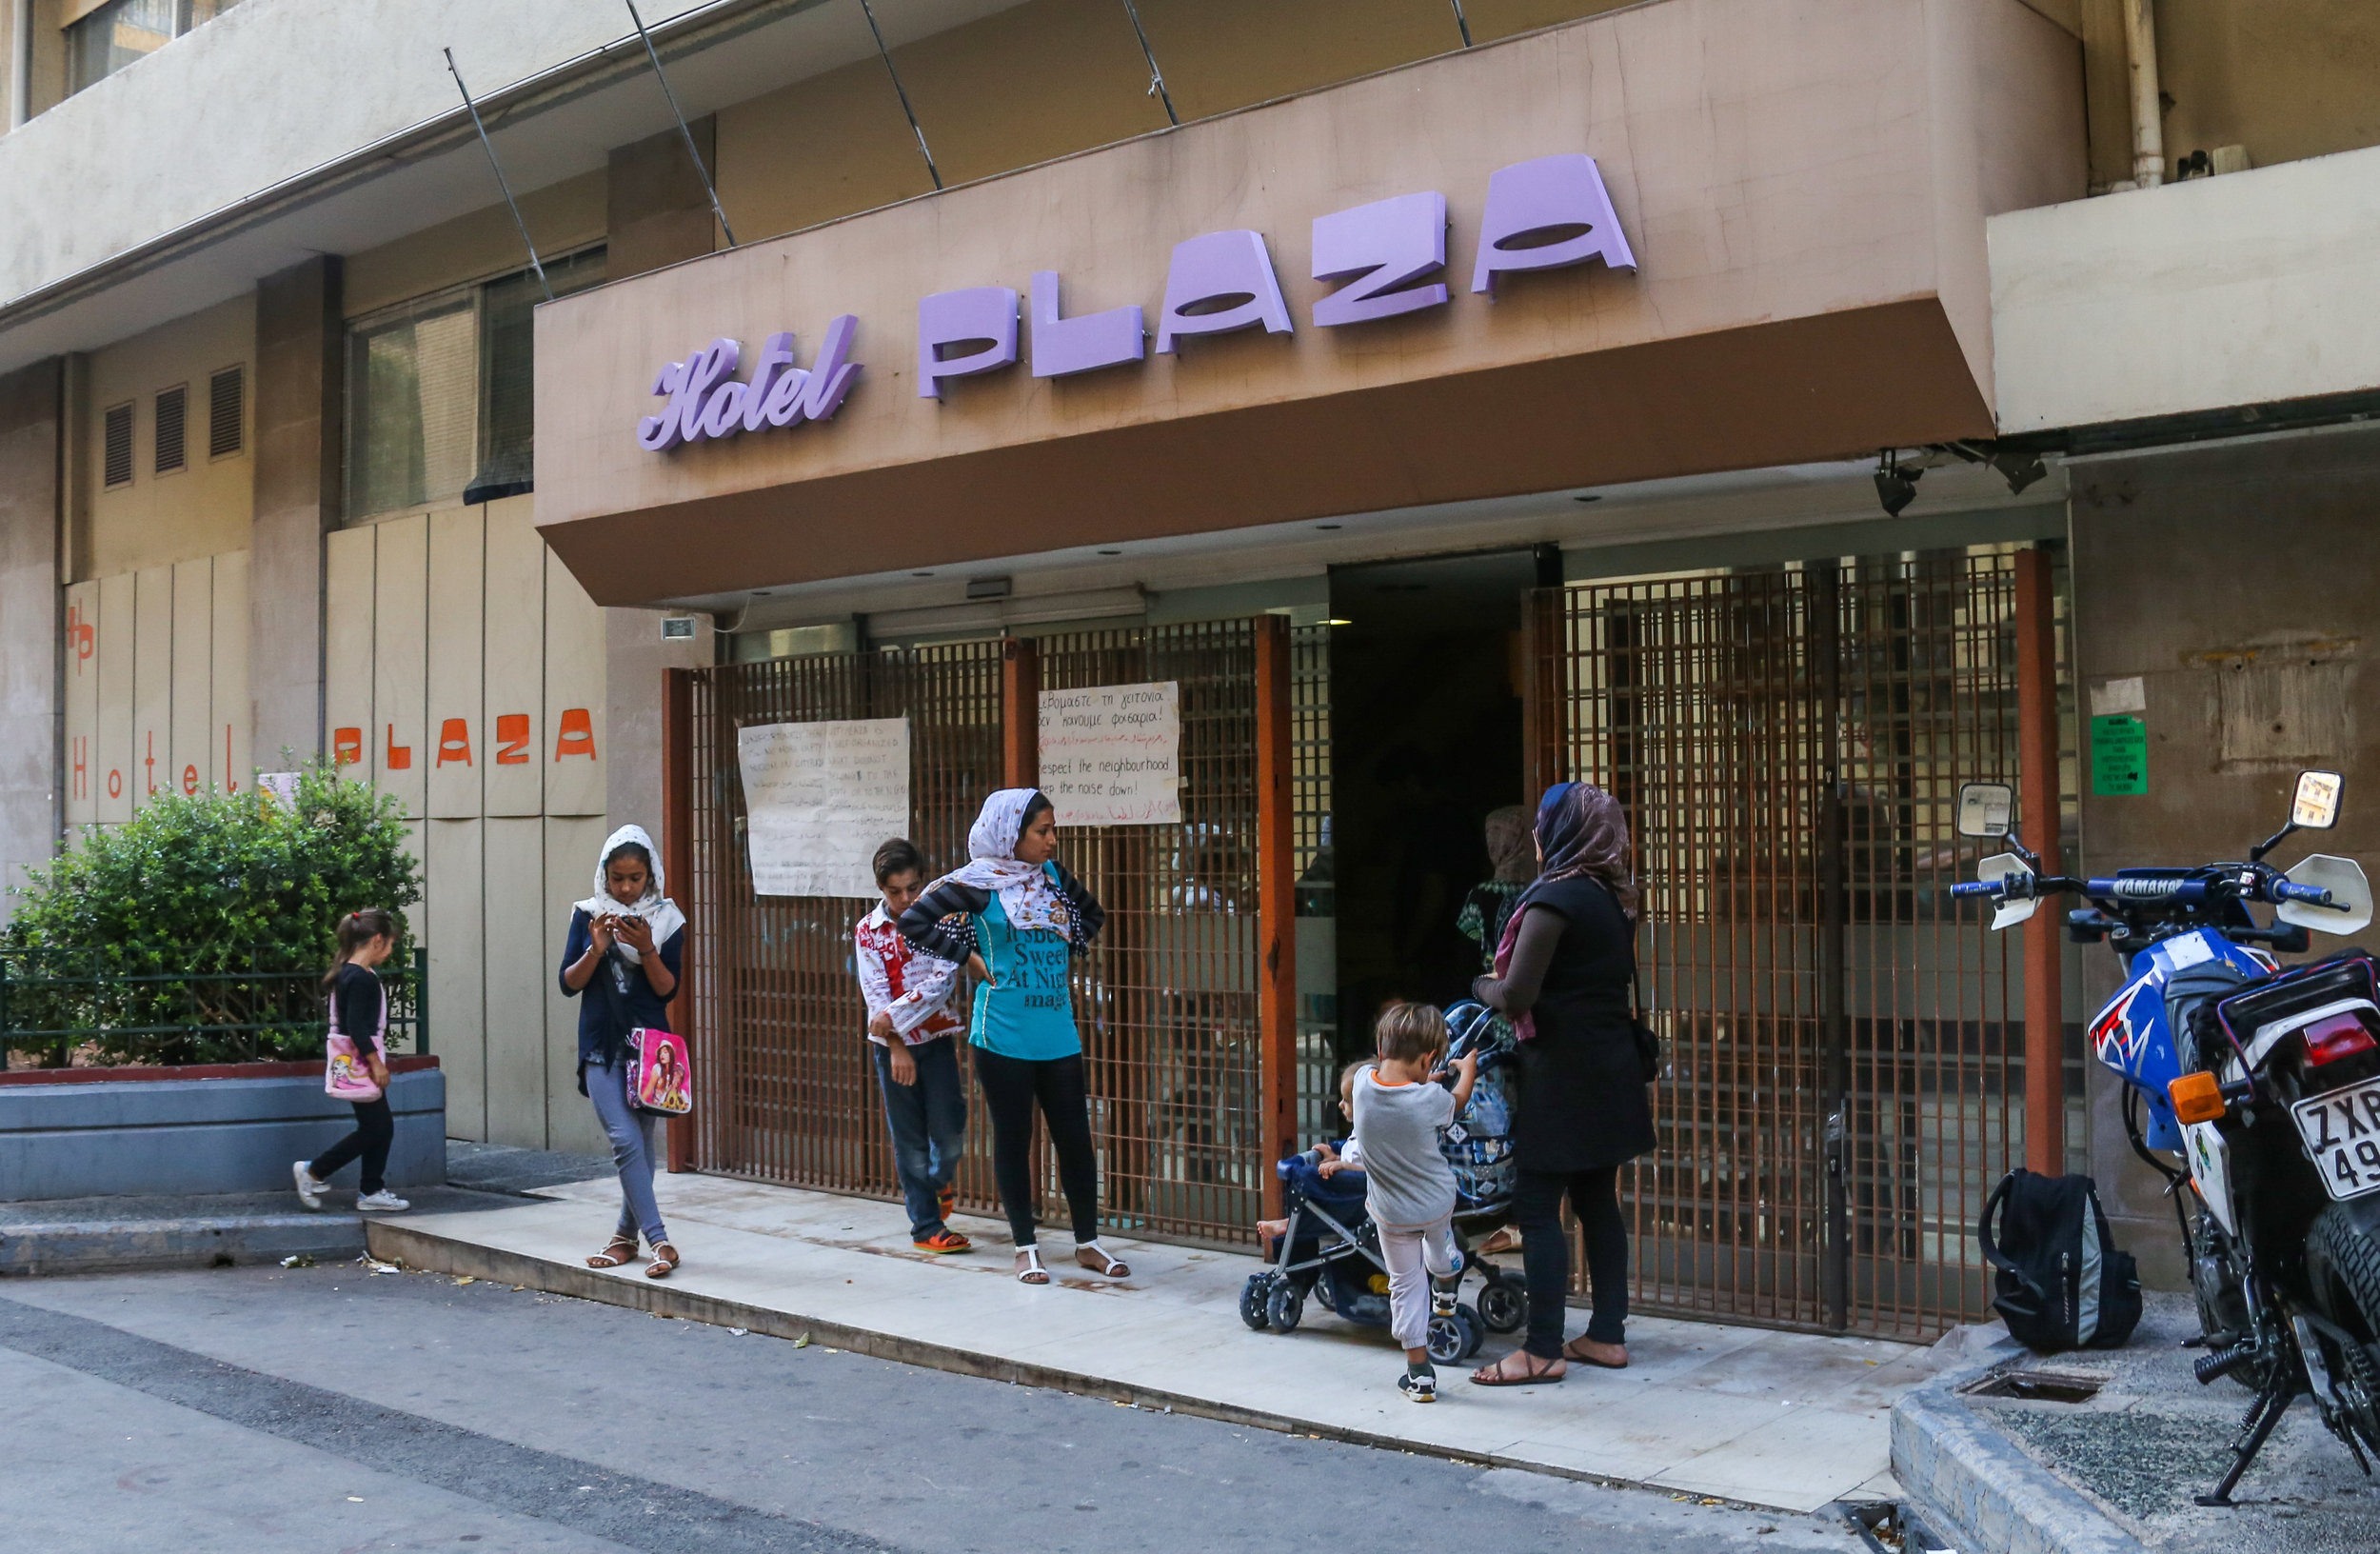  Migrants wait outside as the lobby is cleaned in the City Plaza Hotel. The once abandoned structure is now being reutilized to assist struggling refugees unable to leave Athens. In order to stay, you must work in some capacity. This could mean clean